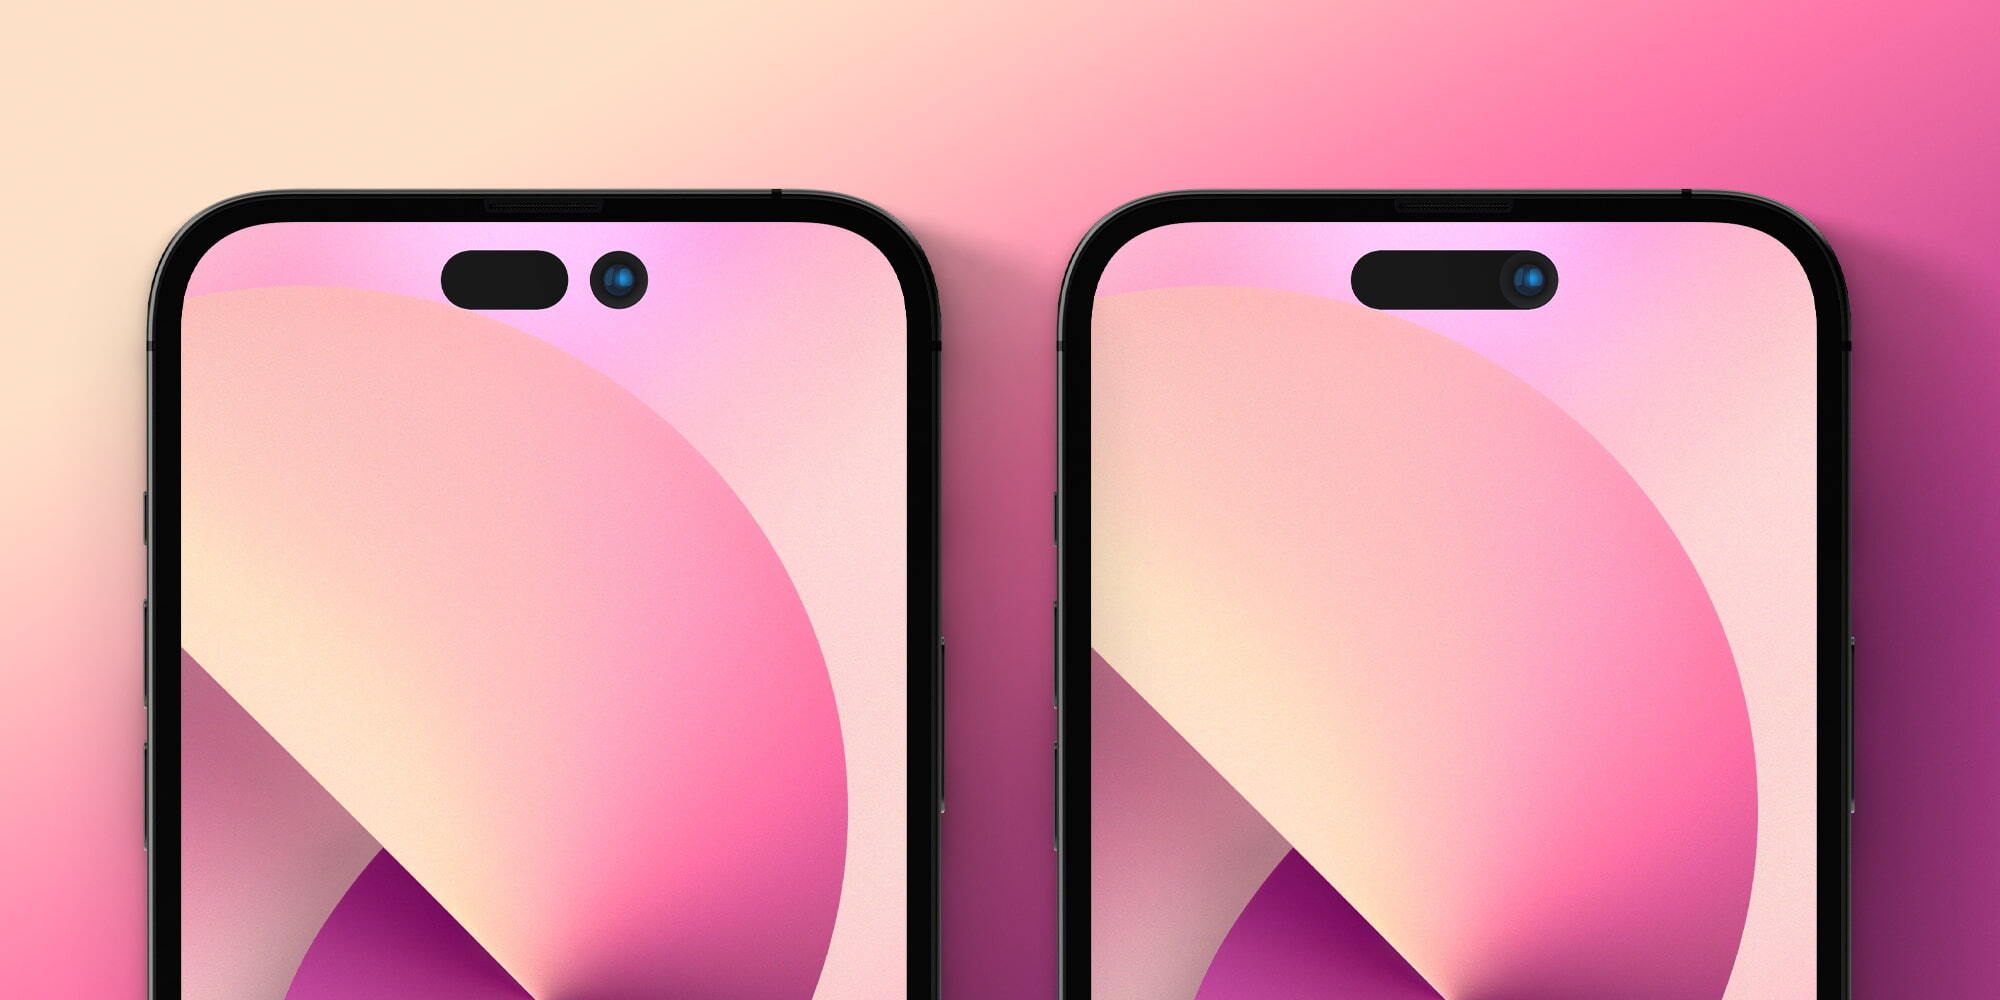 Notchless gradient wallpapers for iPhone X